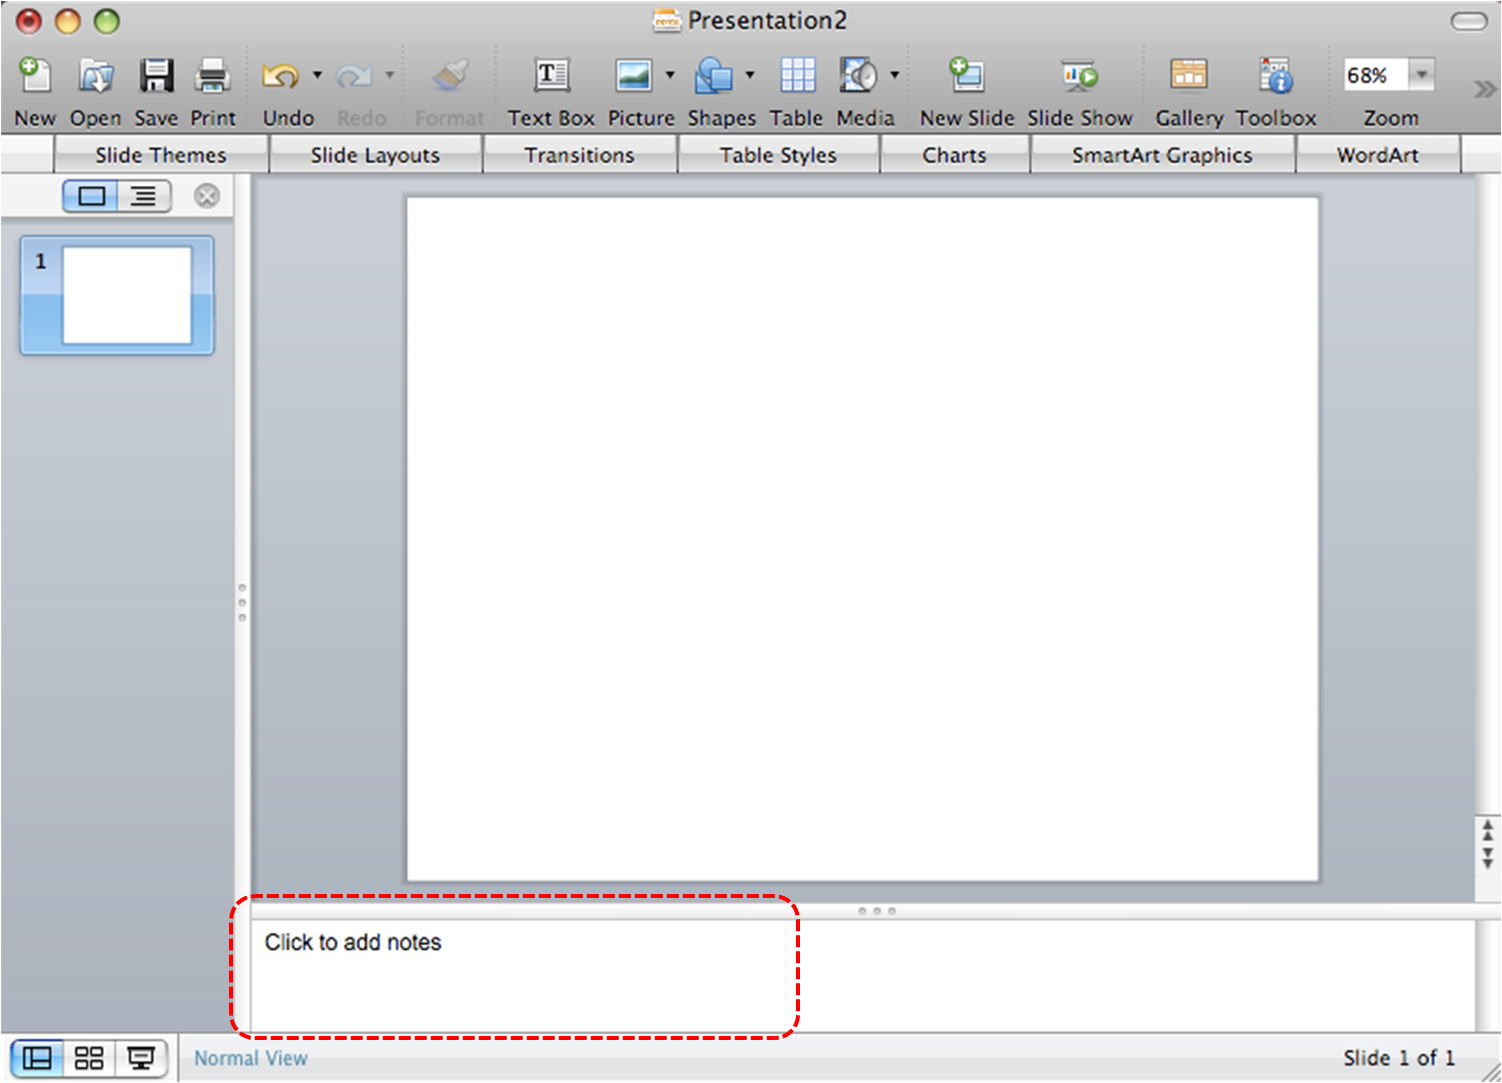 Image demonstrates location of Notes Pane in the normal view.